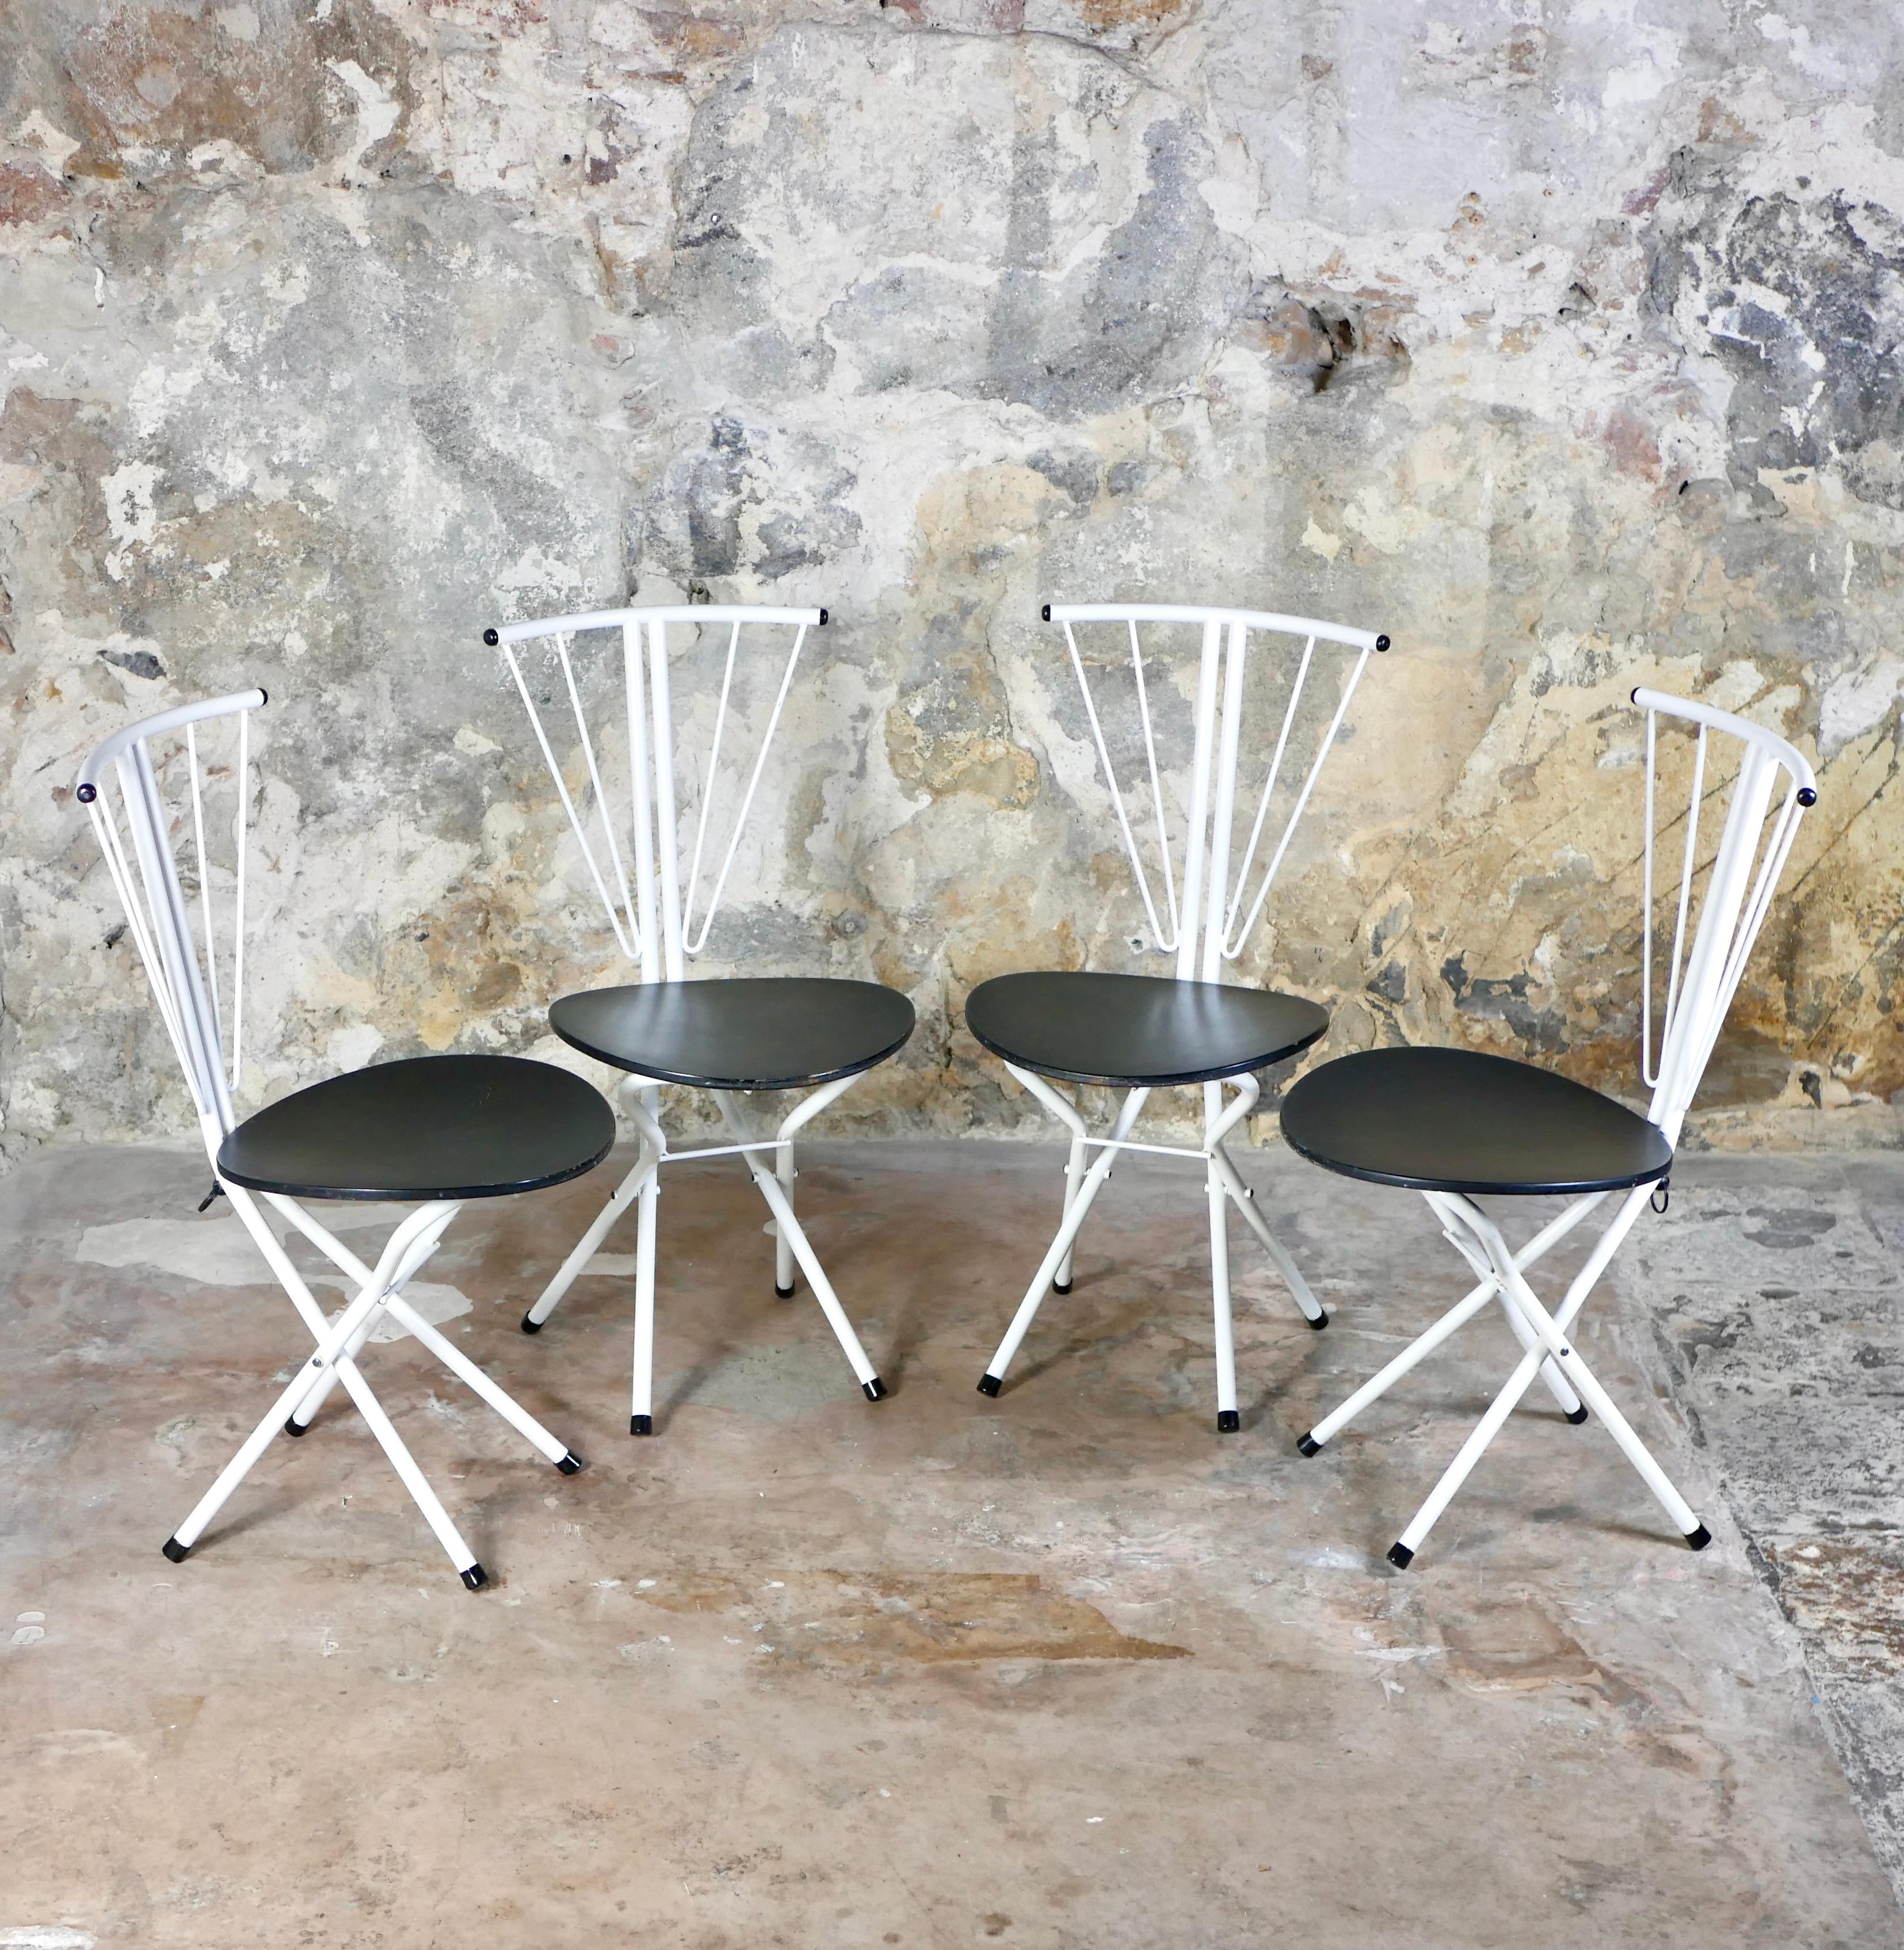 Beautiful set of 4 postmodernist folding chairs from the 1980s, in white lacquered metal and black lacquered wood in the style of the Memphis Group.
A ring in the back of the chair allows to fold them easily by pulling it up.
Overall good condition,